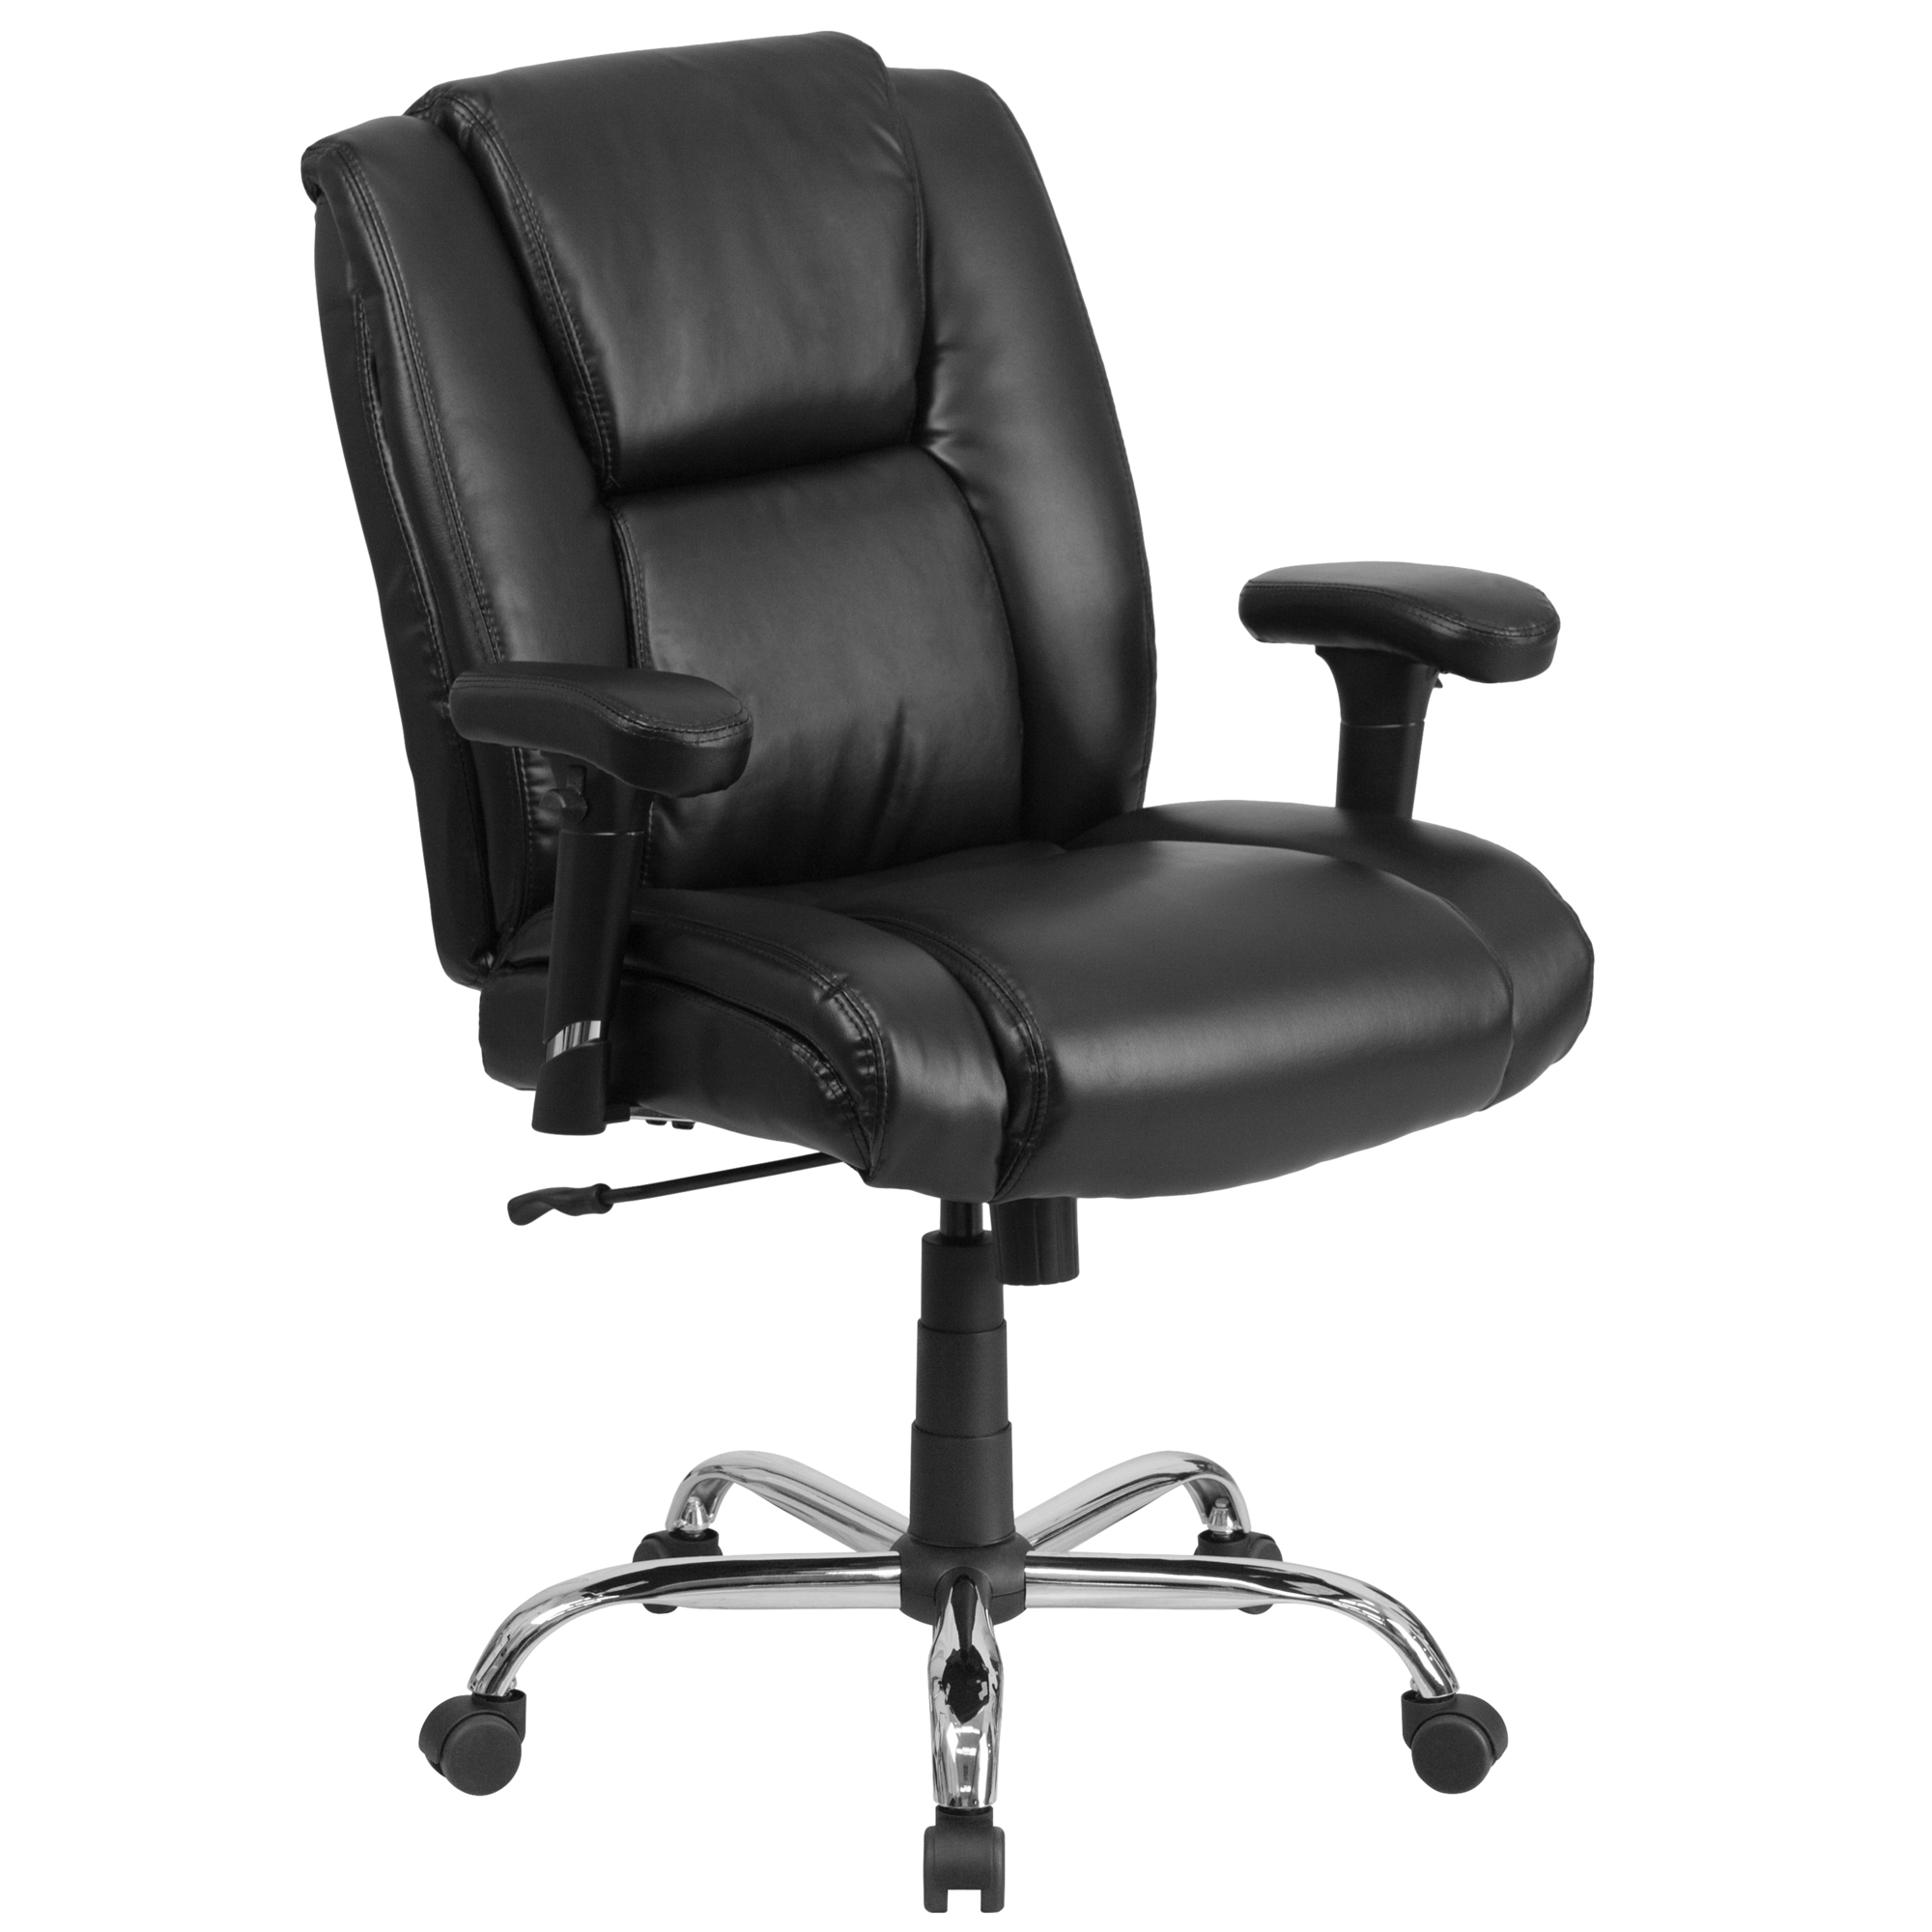 Flash Furniture, Big Tall 400 lb. Rated Black LeatherSoft Chair, Primary Color Black, Included (qty.) 1, Model GO2132LEA